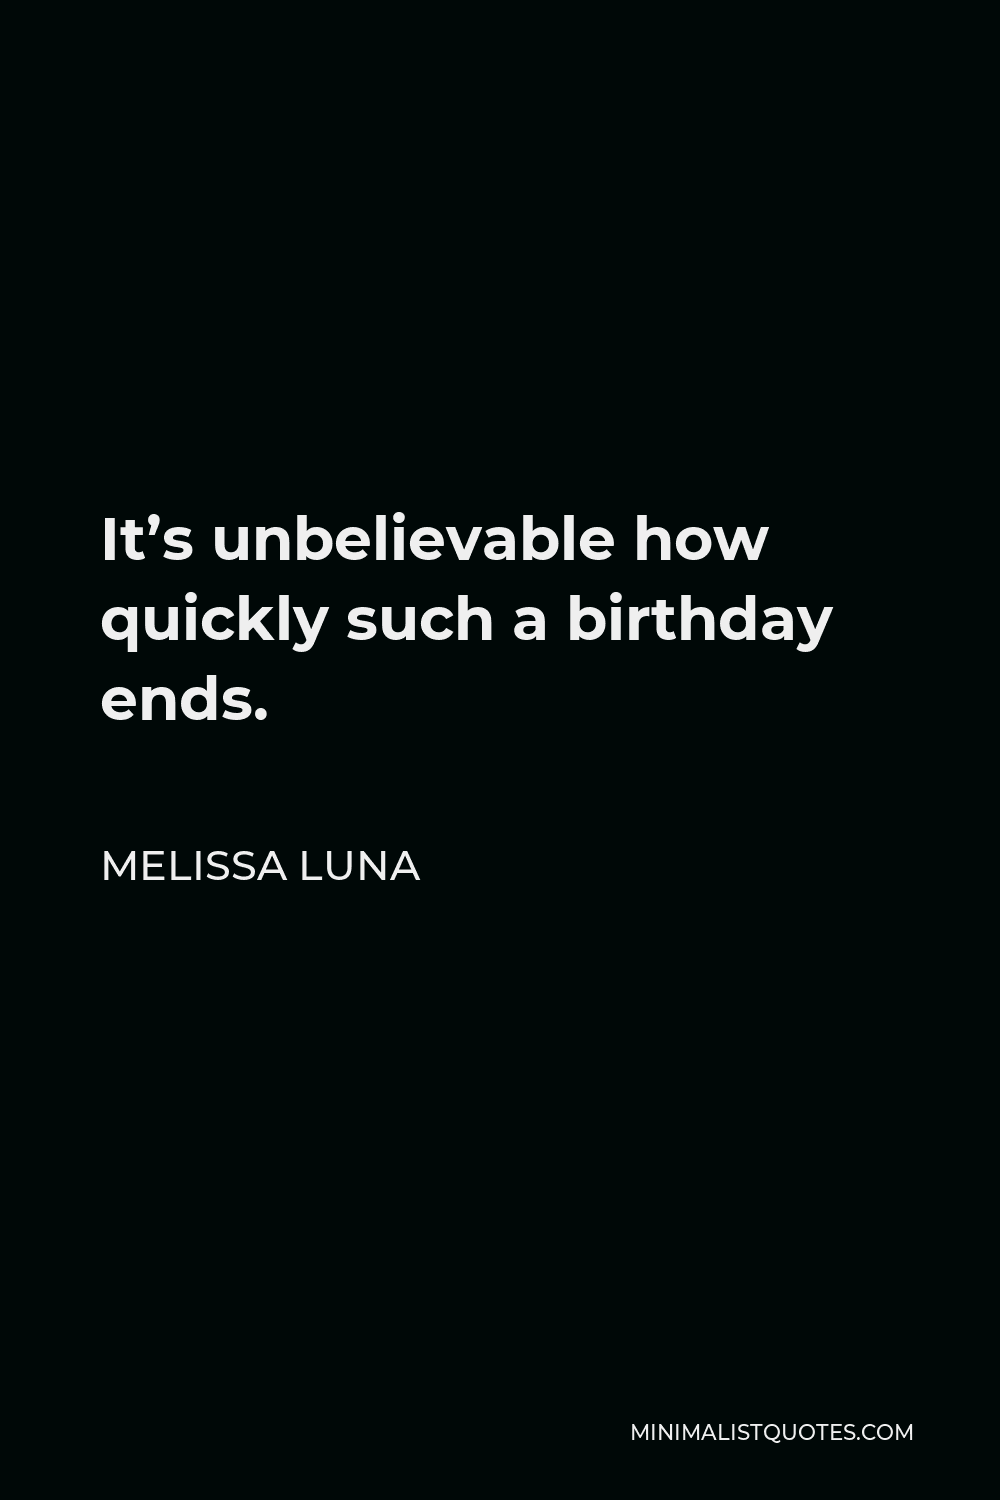 Melissa Luna Quote - It’s unbelievable how quickly such a birthday ends.